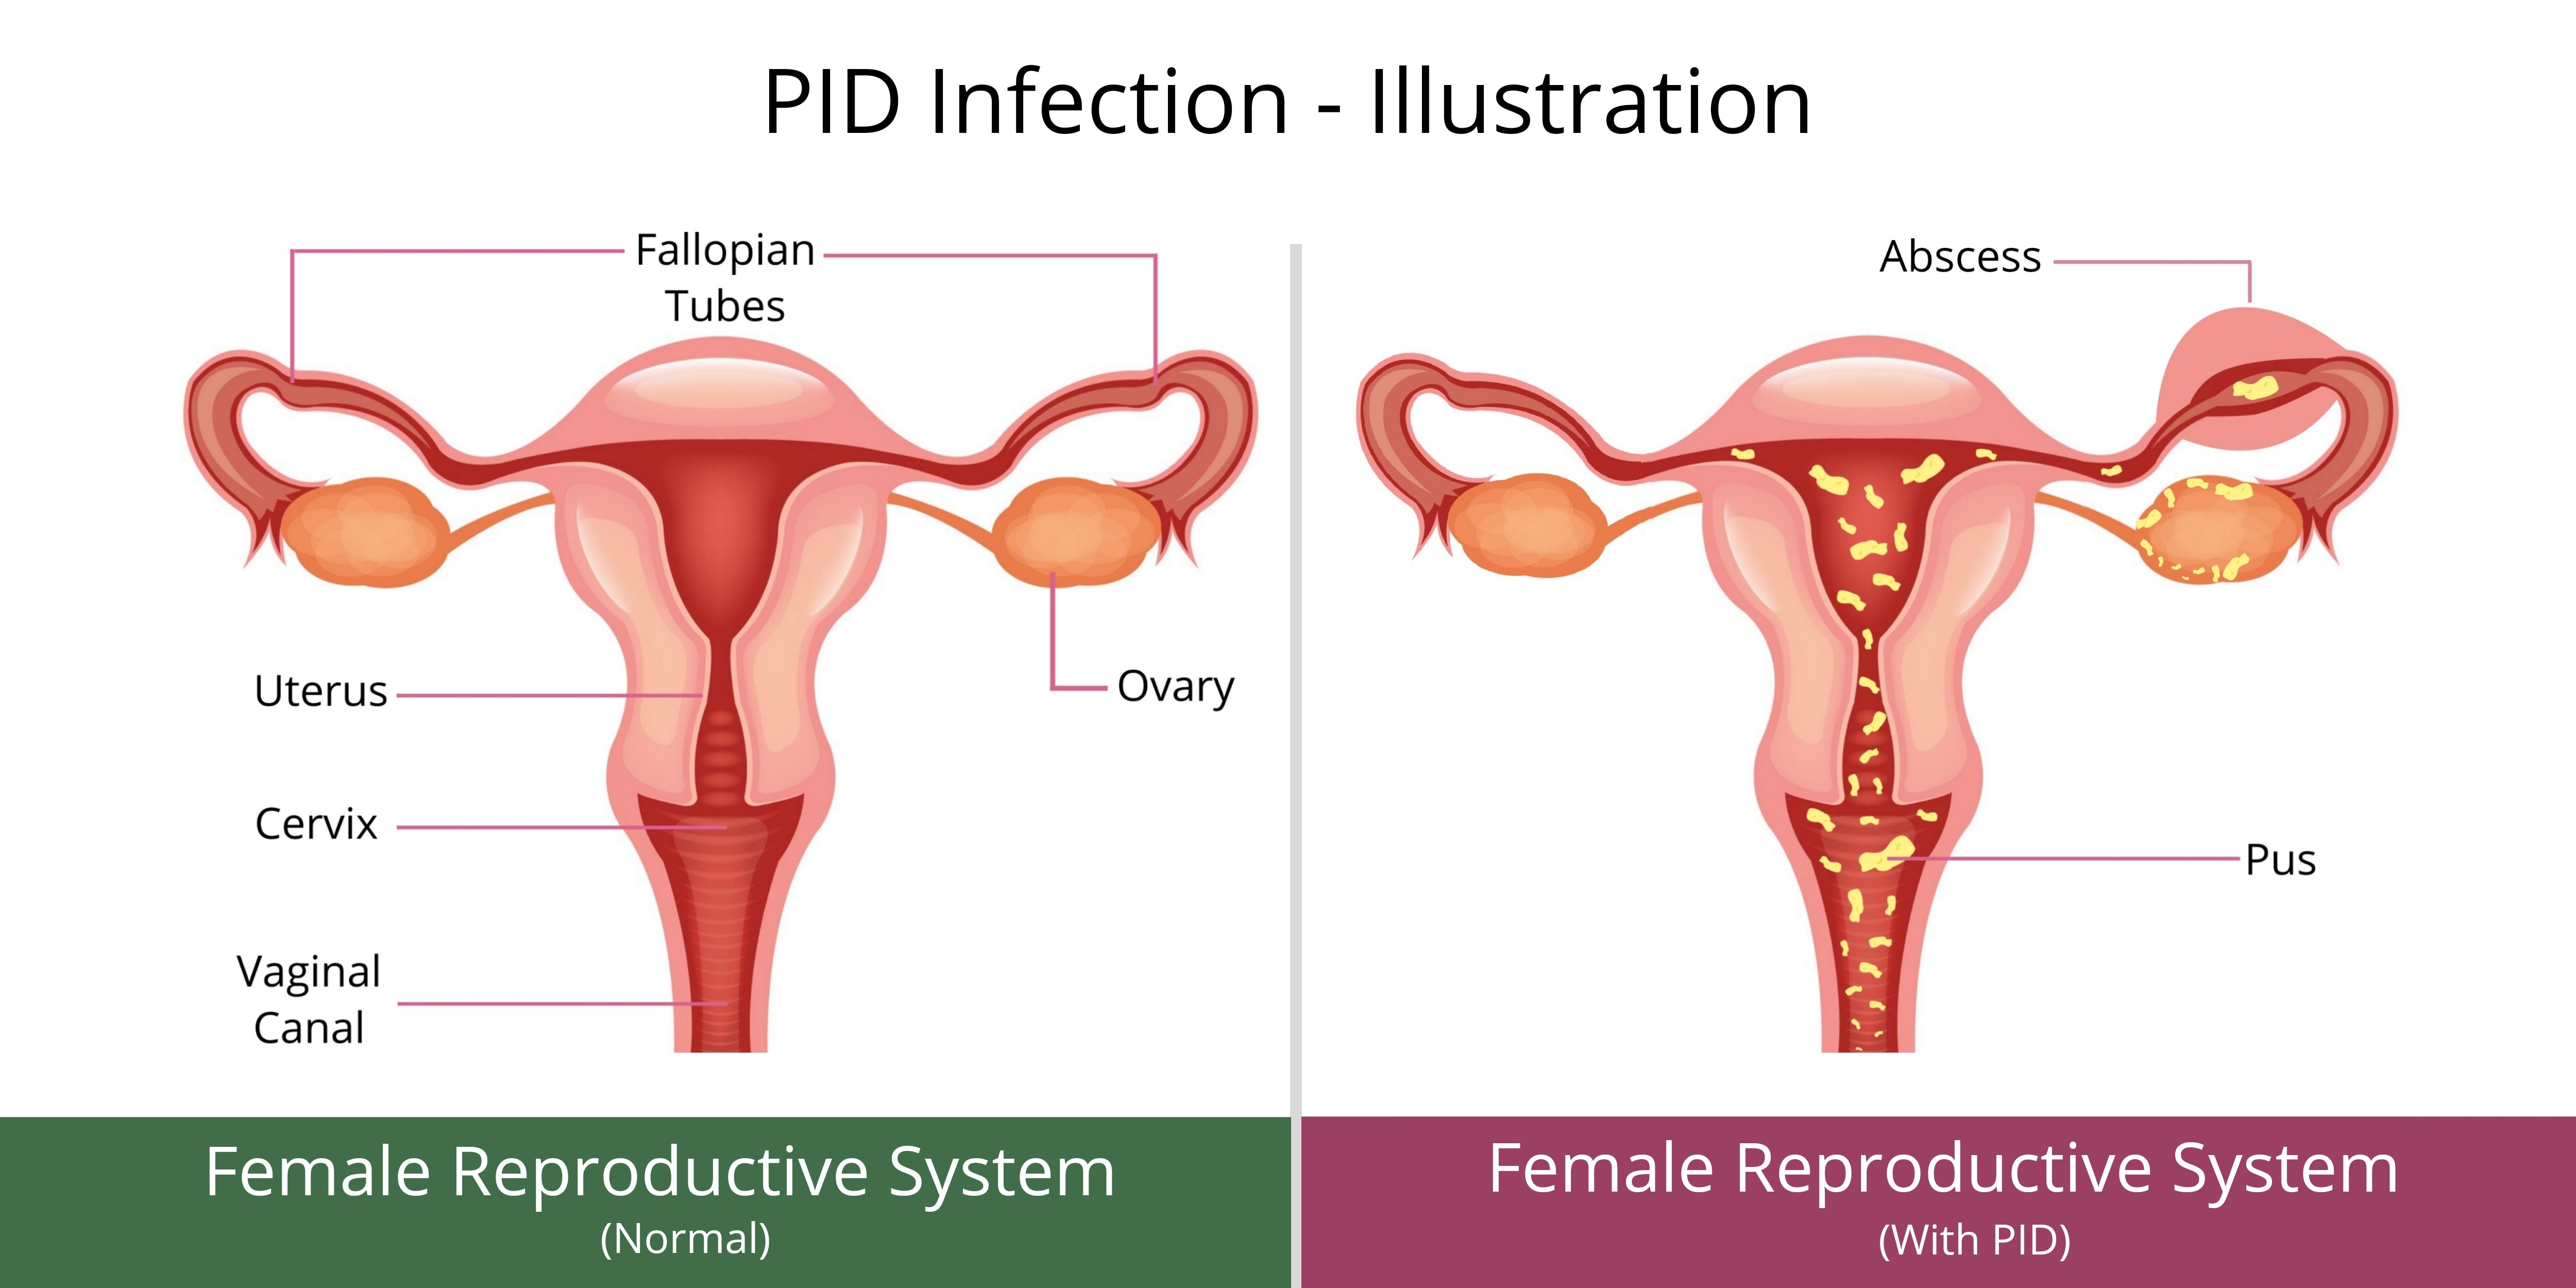 Image exhibiting PID infection in female reproductive system.